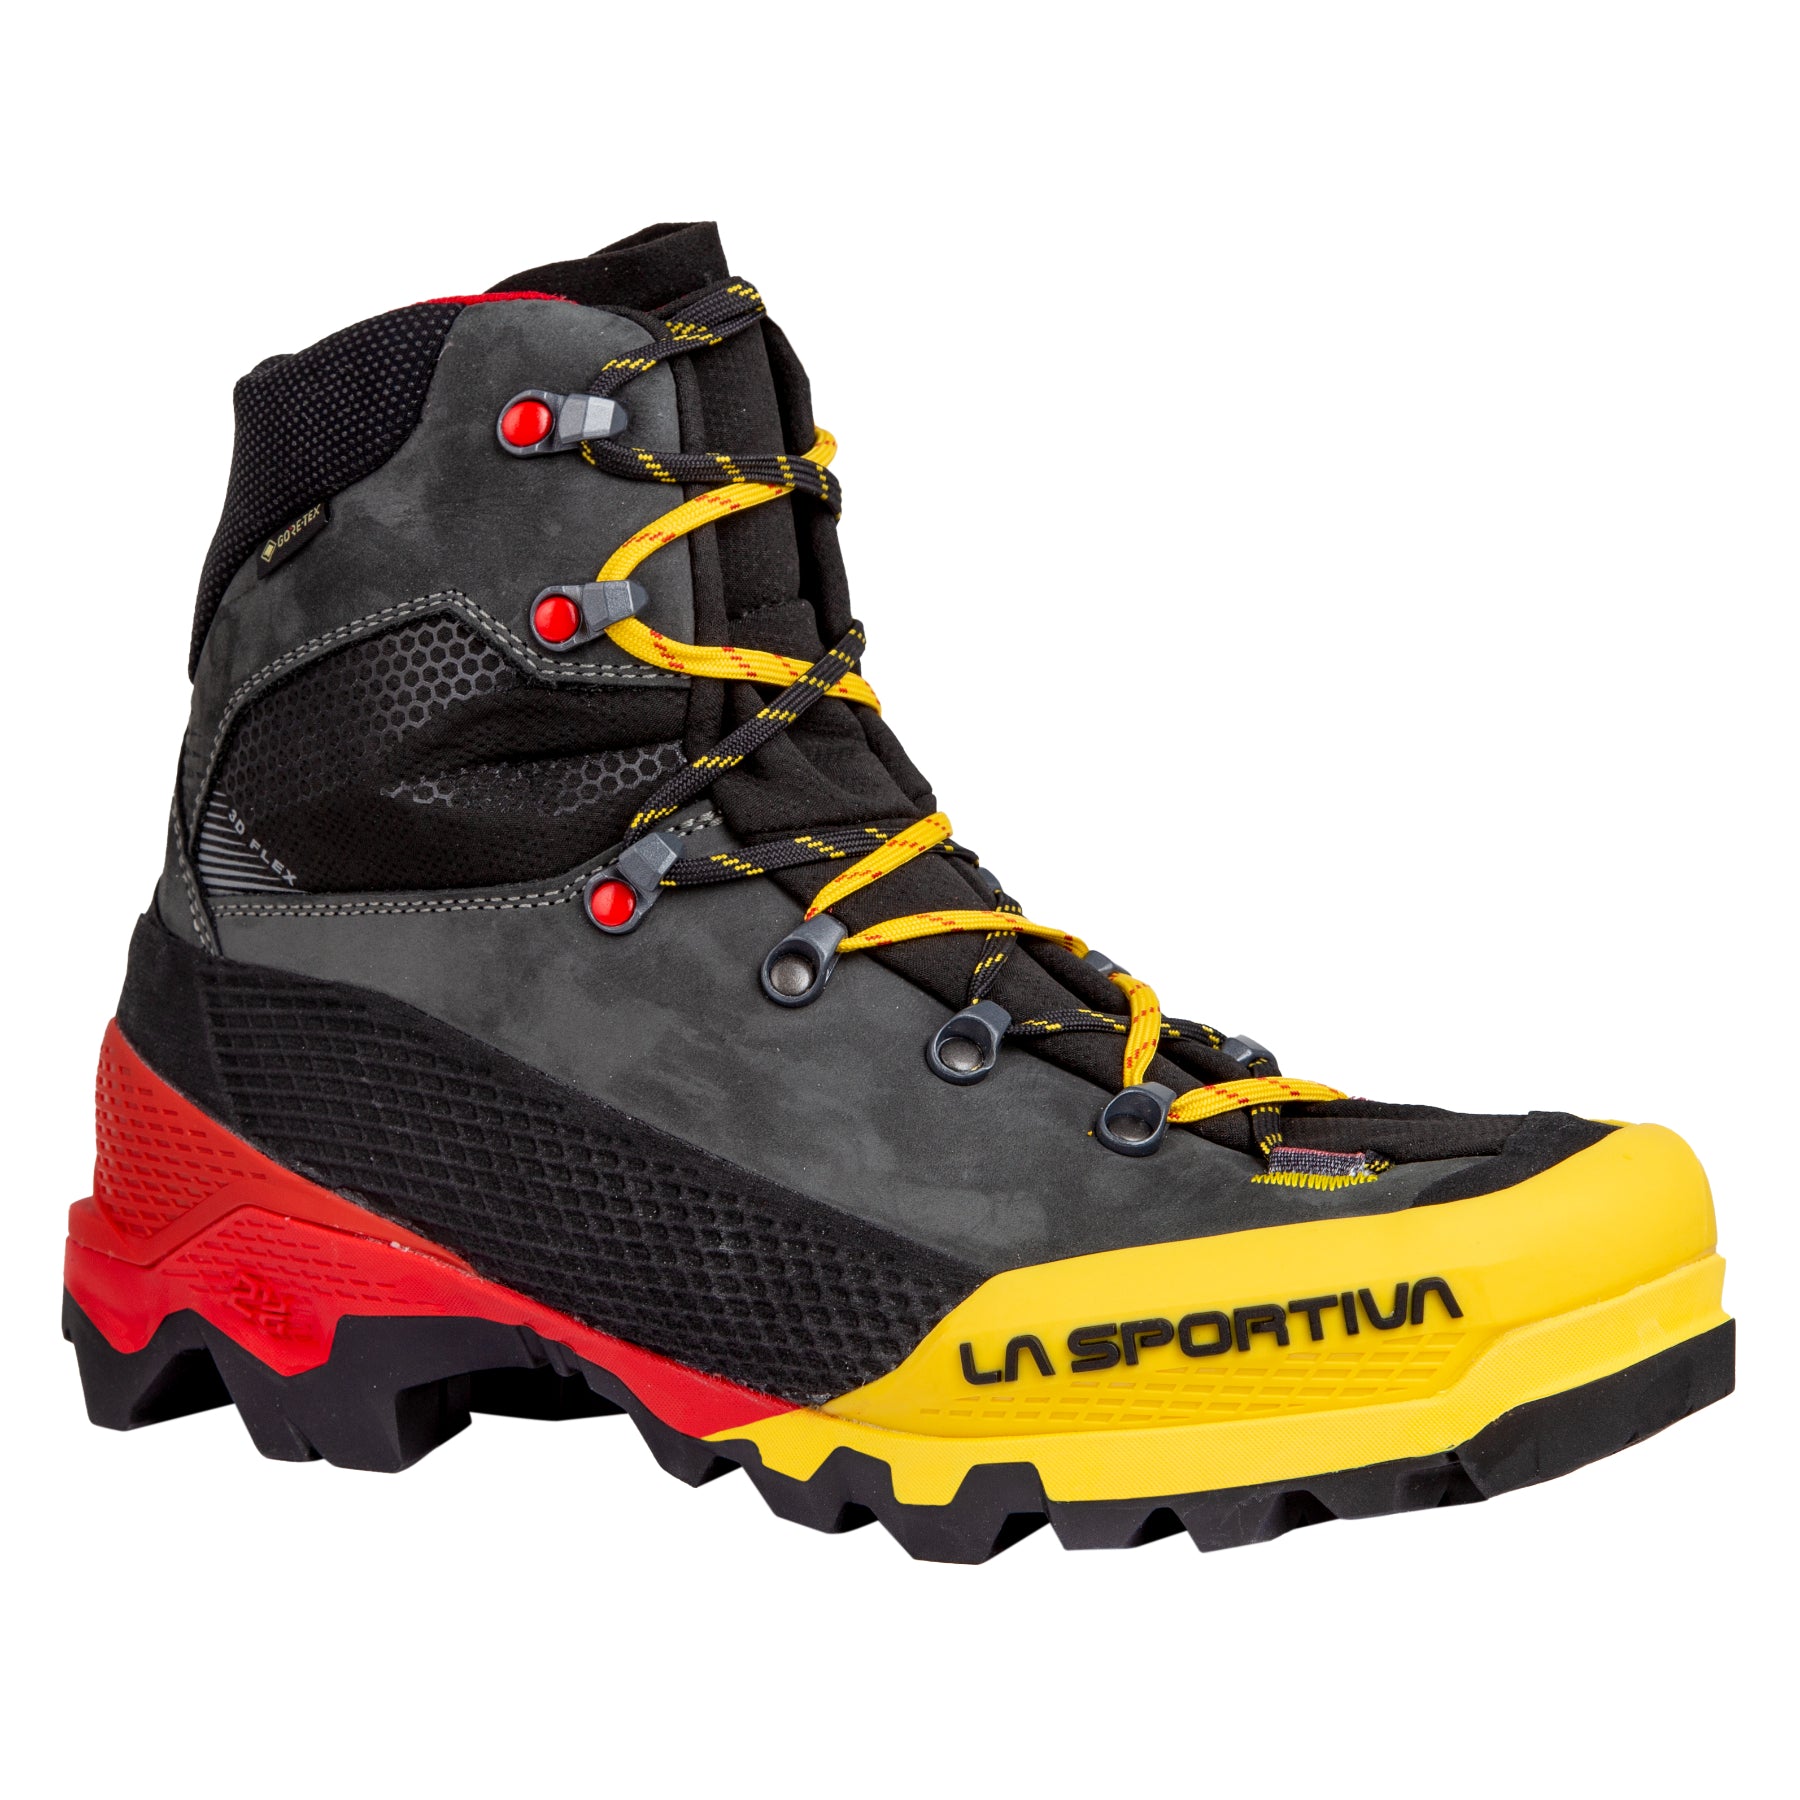 La Sportiva Aequilibrium LT GTX mens in black and yellow side view